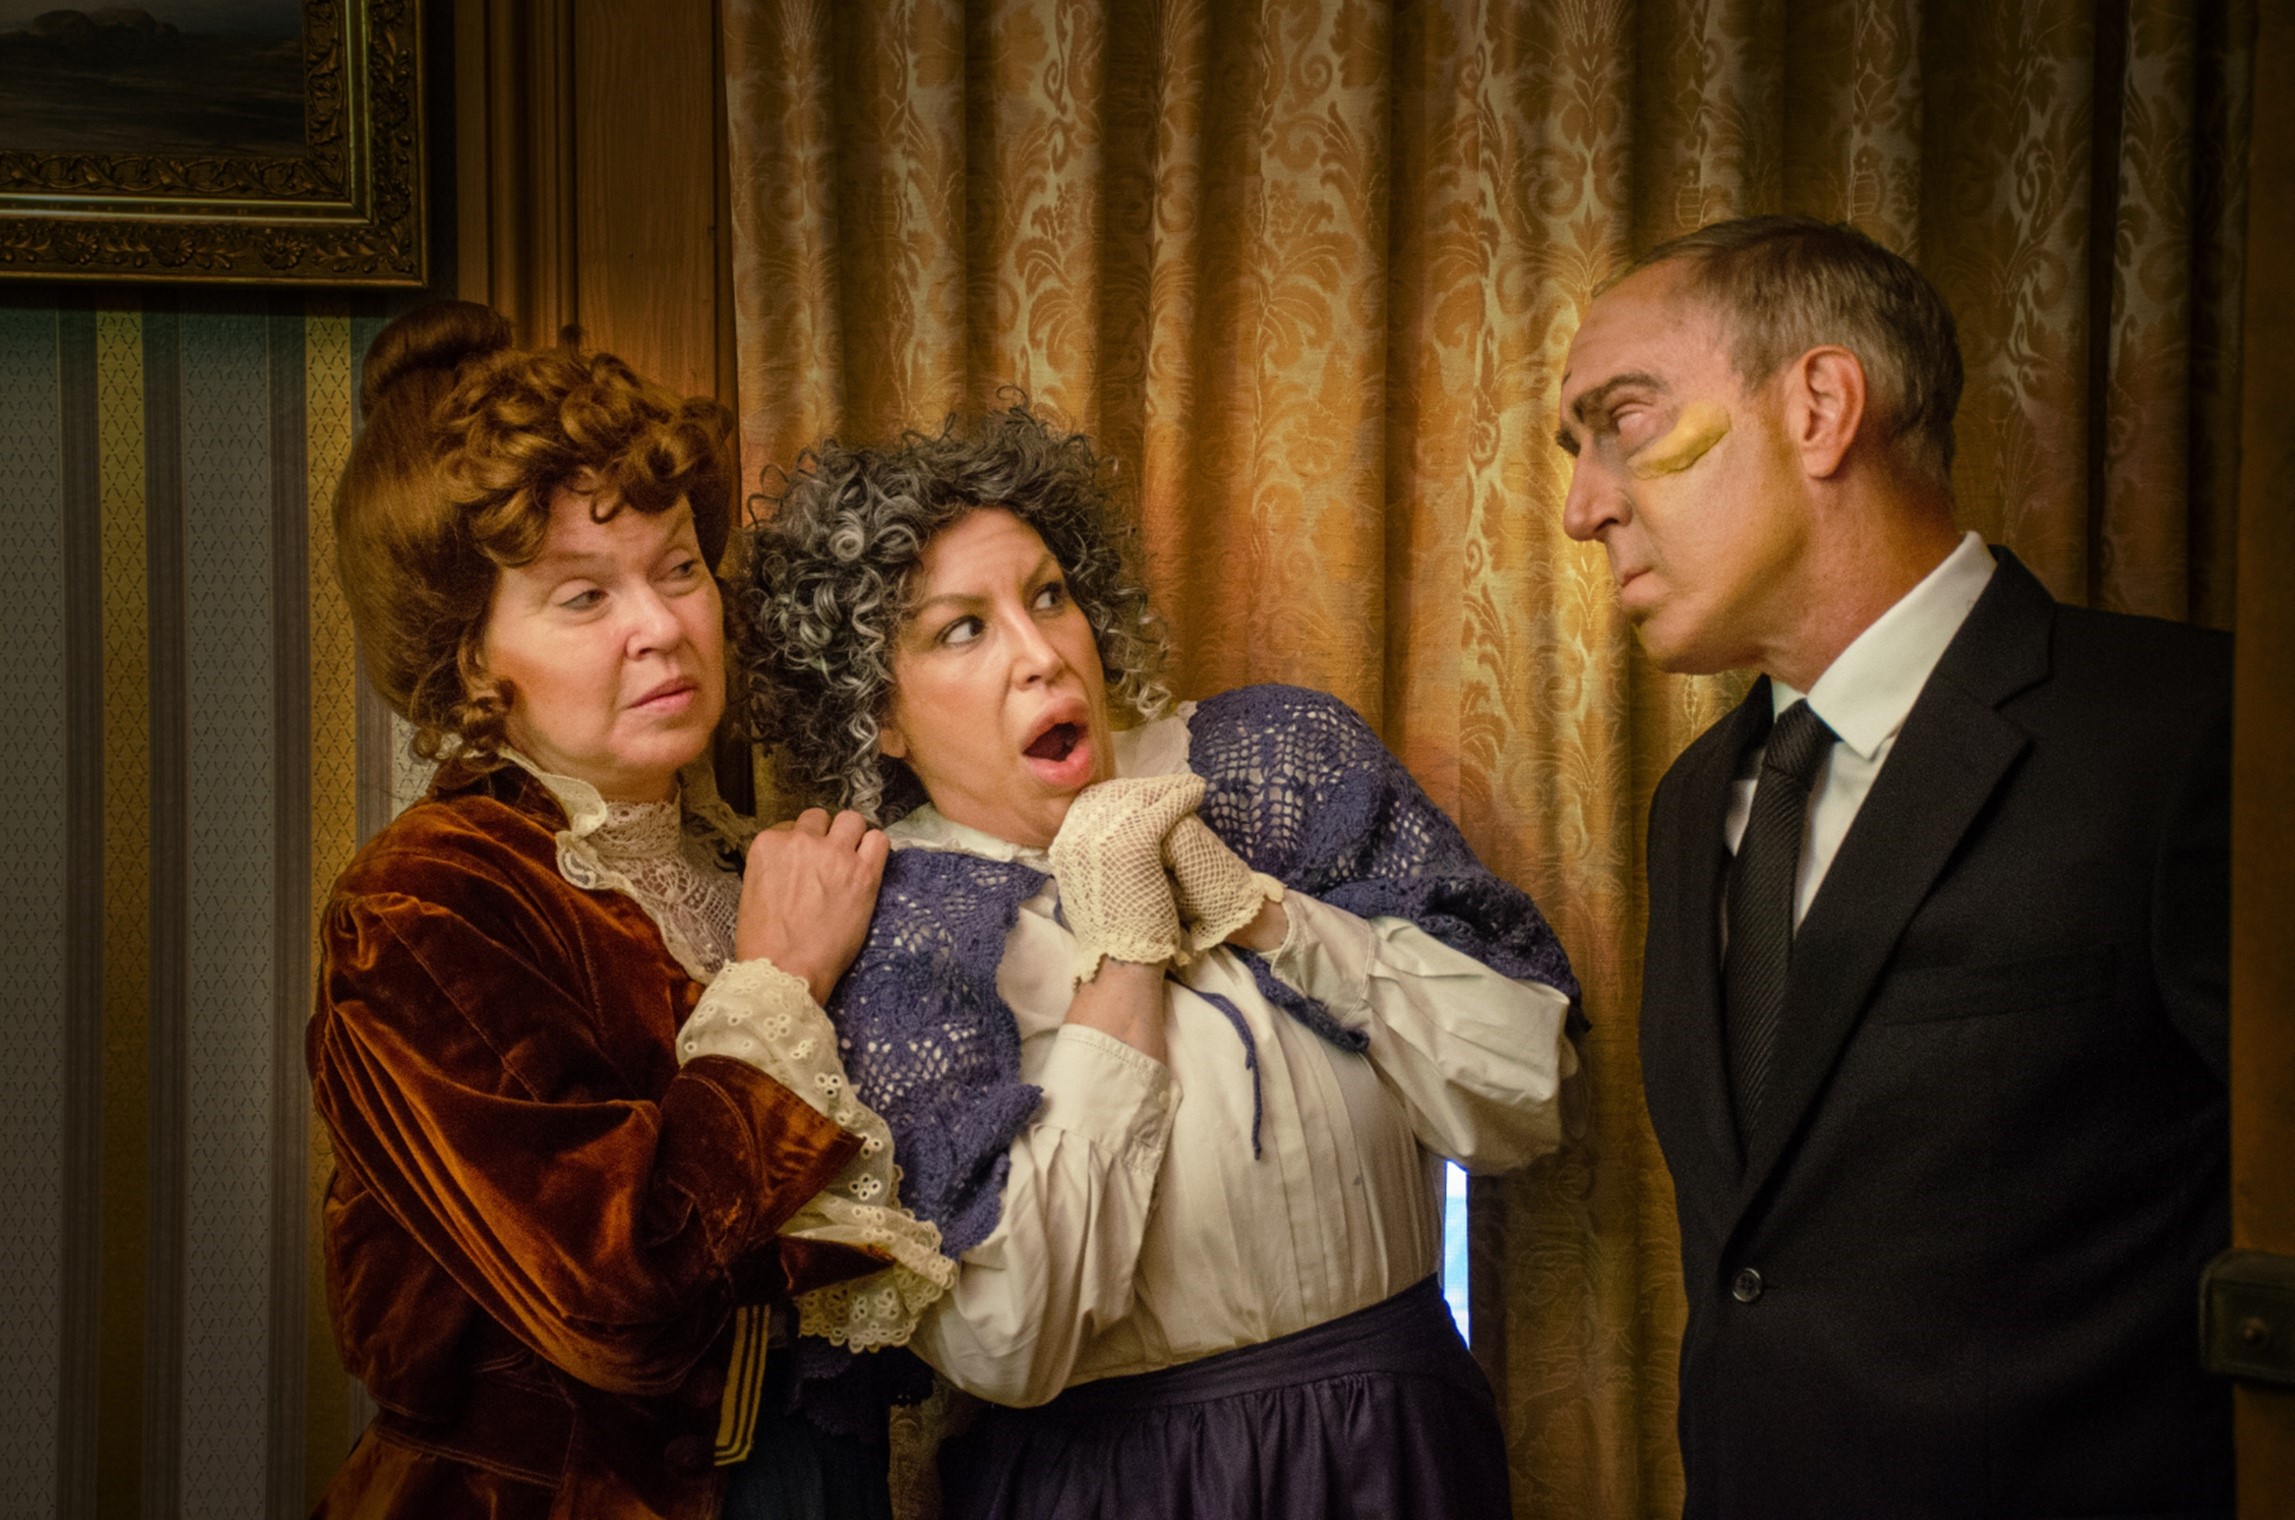 Jonathan (Steve Larson) pays an unwelcoming surprise visit to his Aunts Martha (Joyce McGookey, left) and Abby (Andrea Krass McDonald, right) in Village Player's Production of Arsenic and Old Lace. (Photo credit: Joseph Lease)